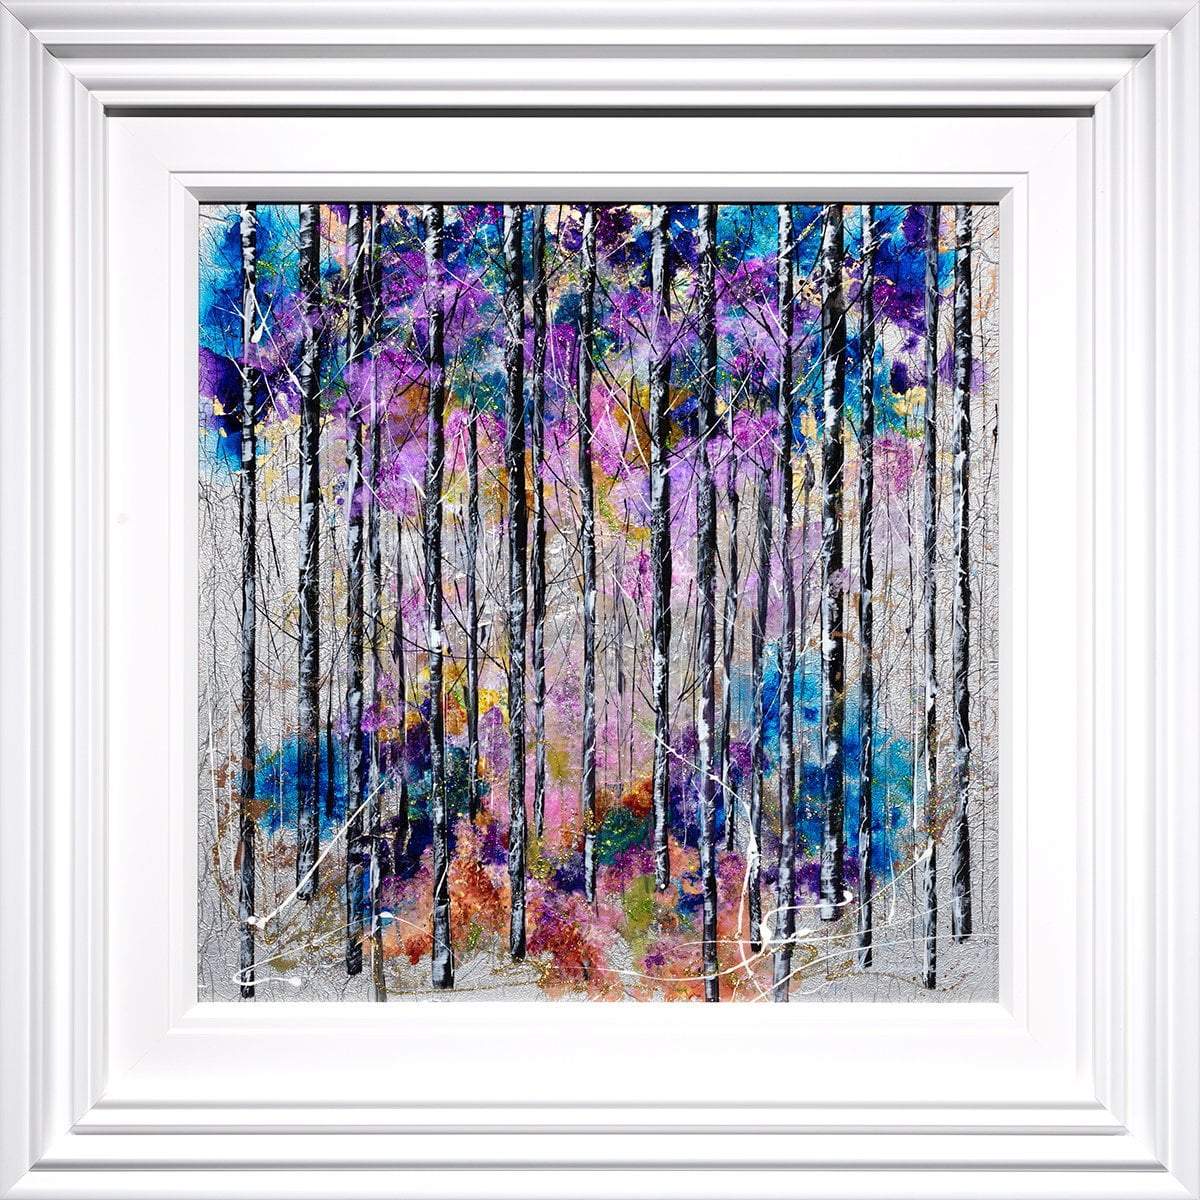 Moments of Bliss - Original Rozanne Bell Framed